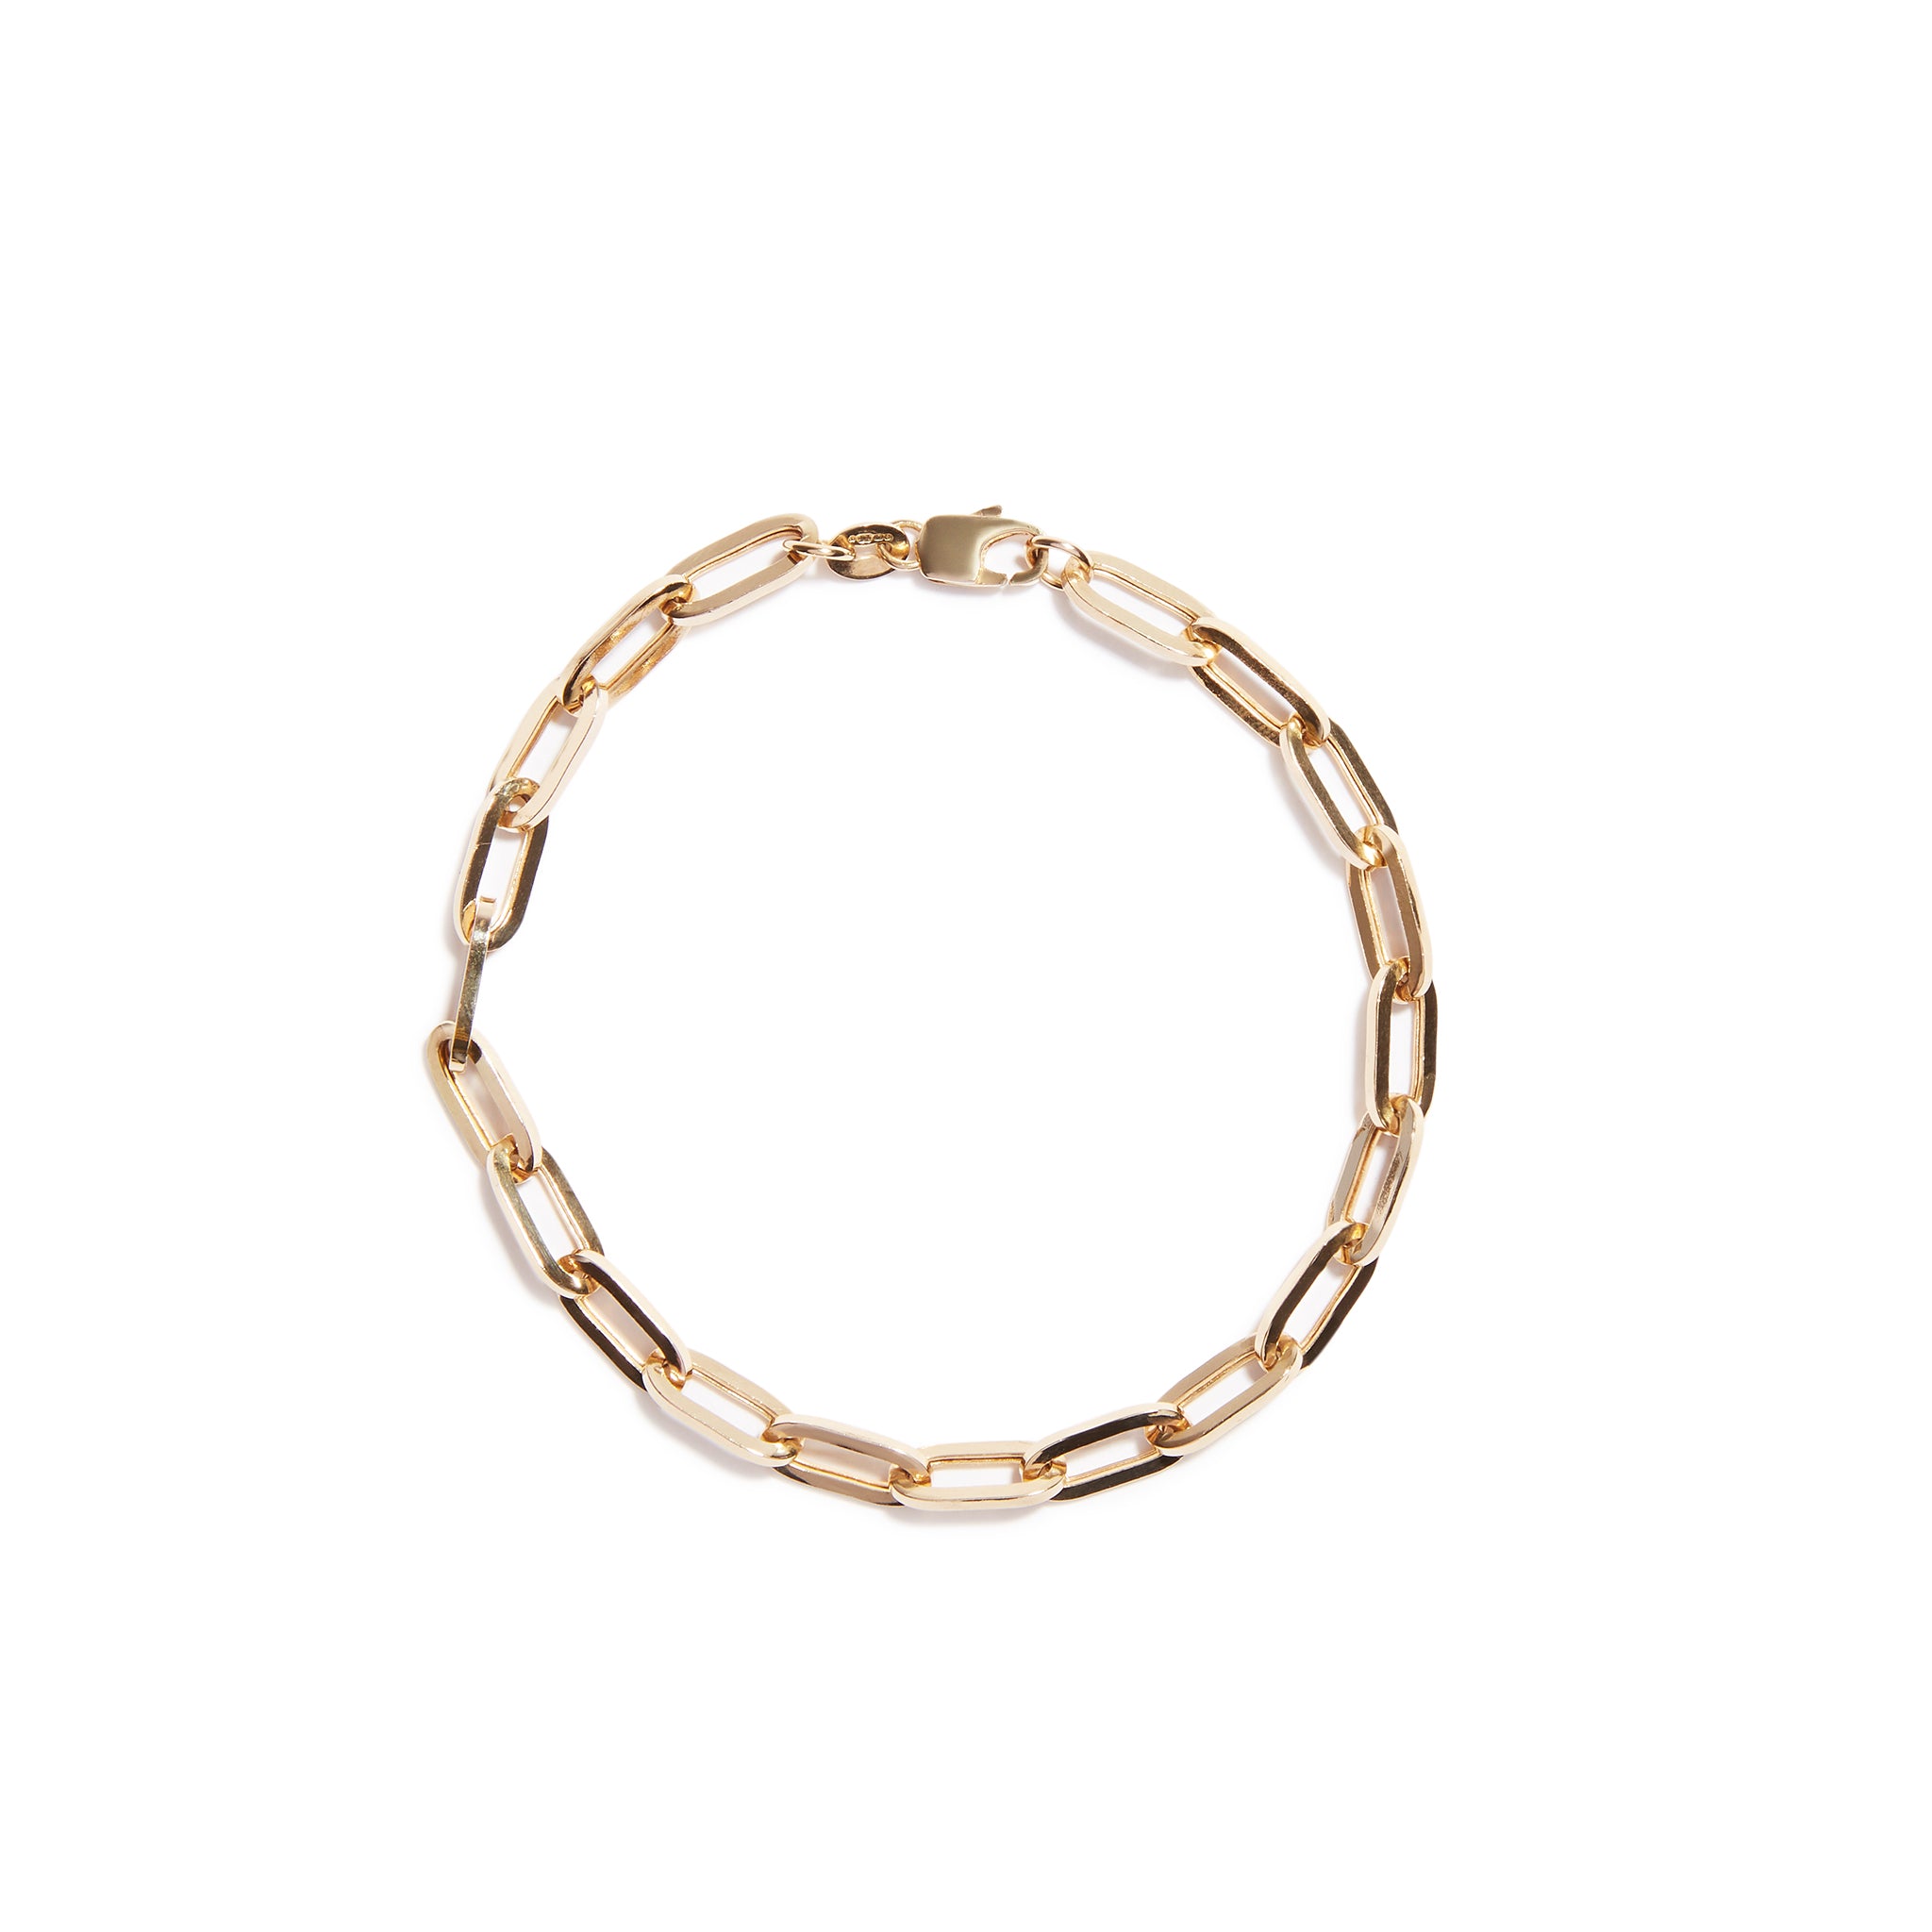 A bold and stylish large paper chain bracelet crafted from 9 carat gold, perfect for making a statement with your look.